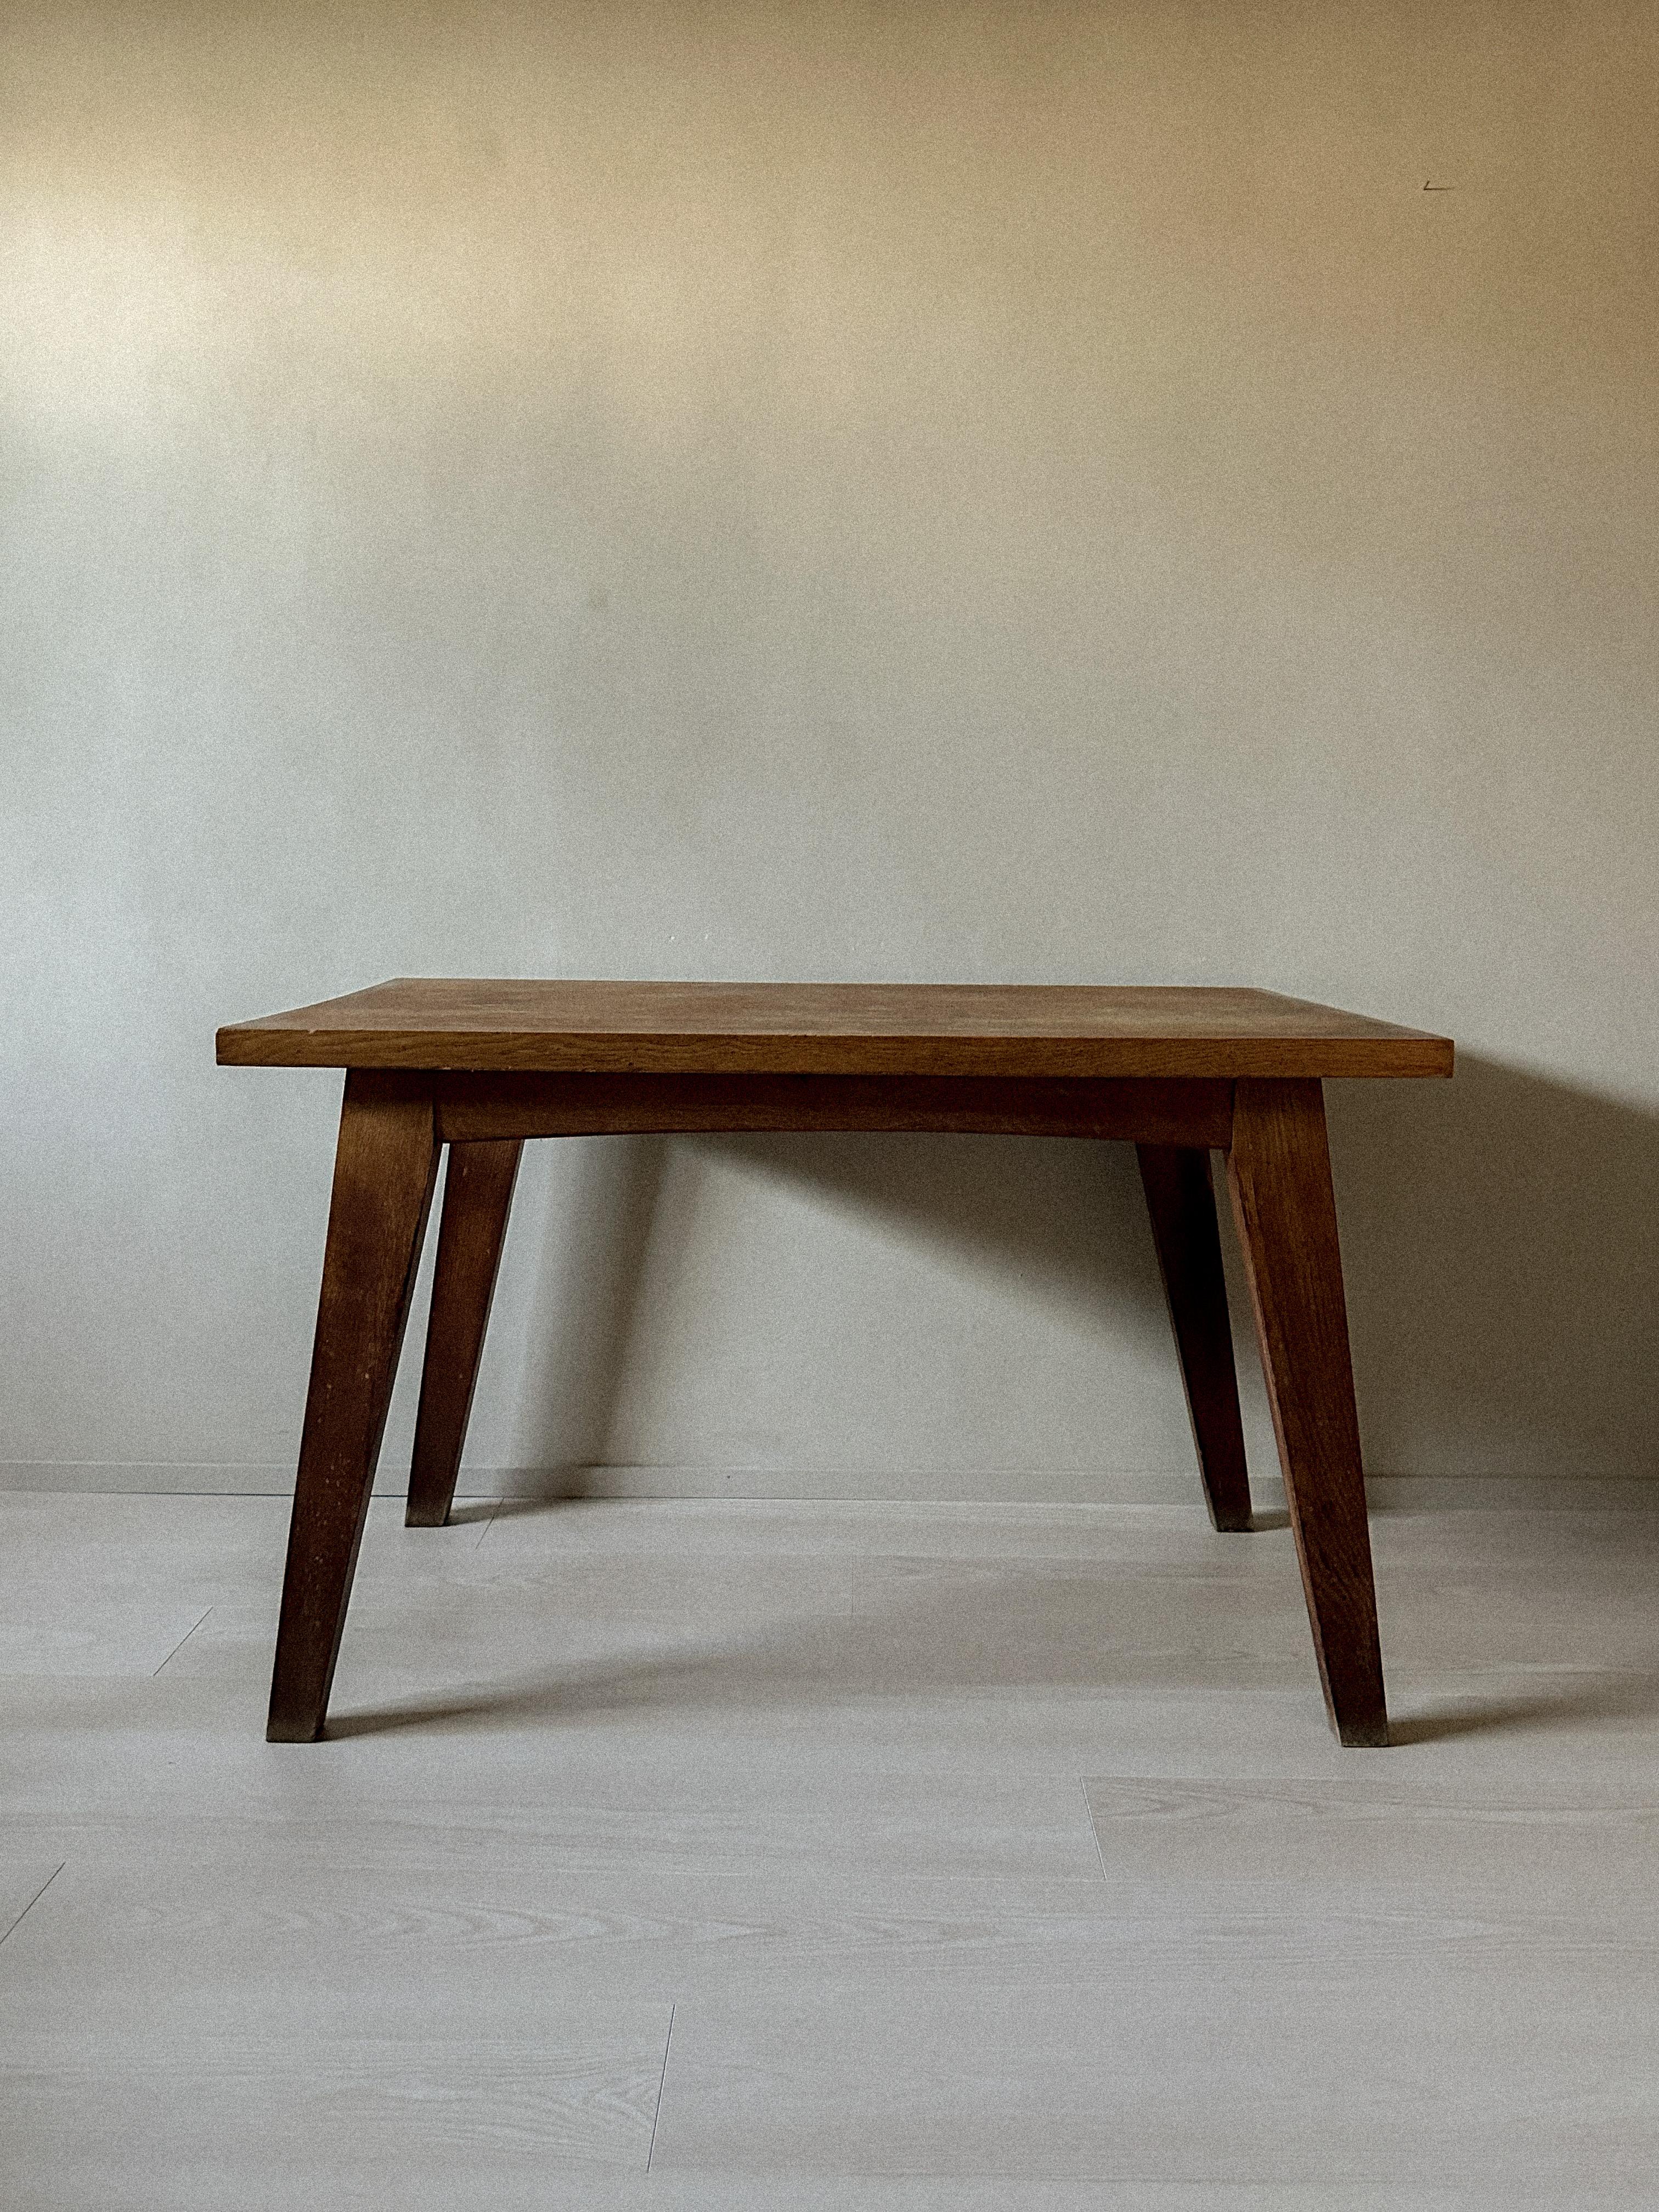 A beautiful square vintage dinging table in the manner of Pierre Jeanneret. In oak, original from France in the 1950s. 